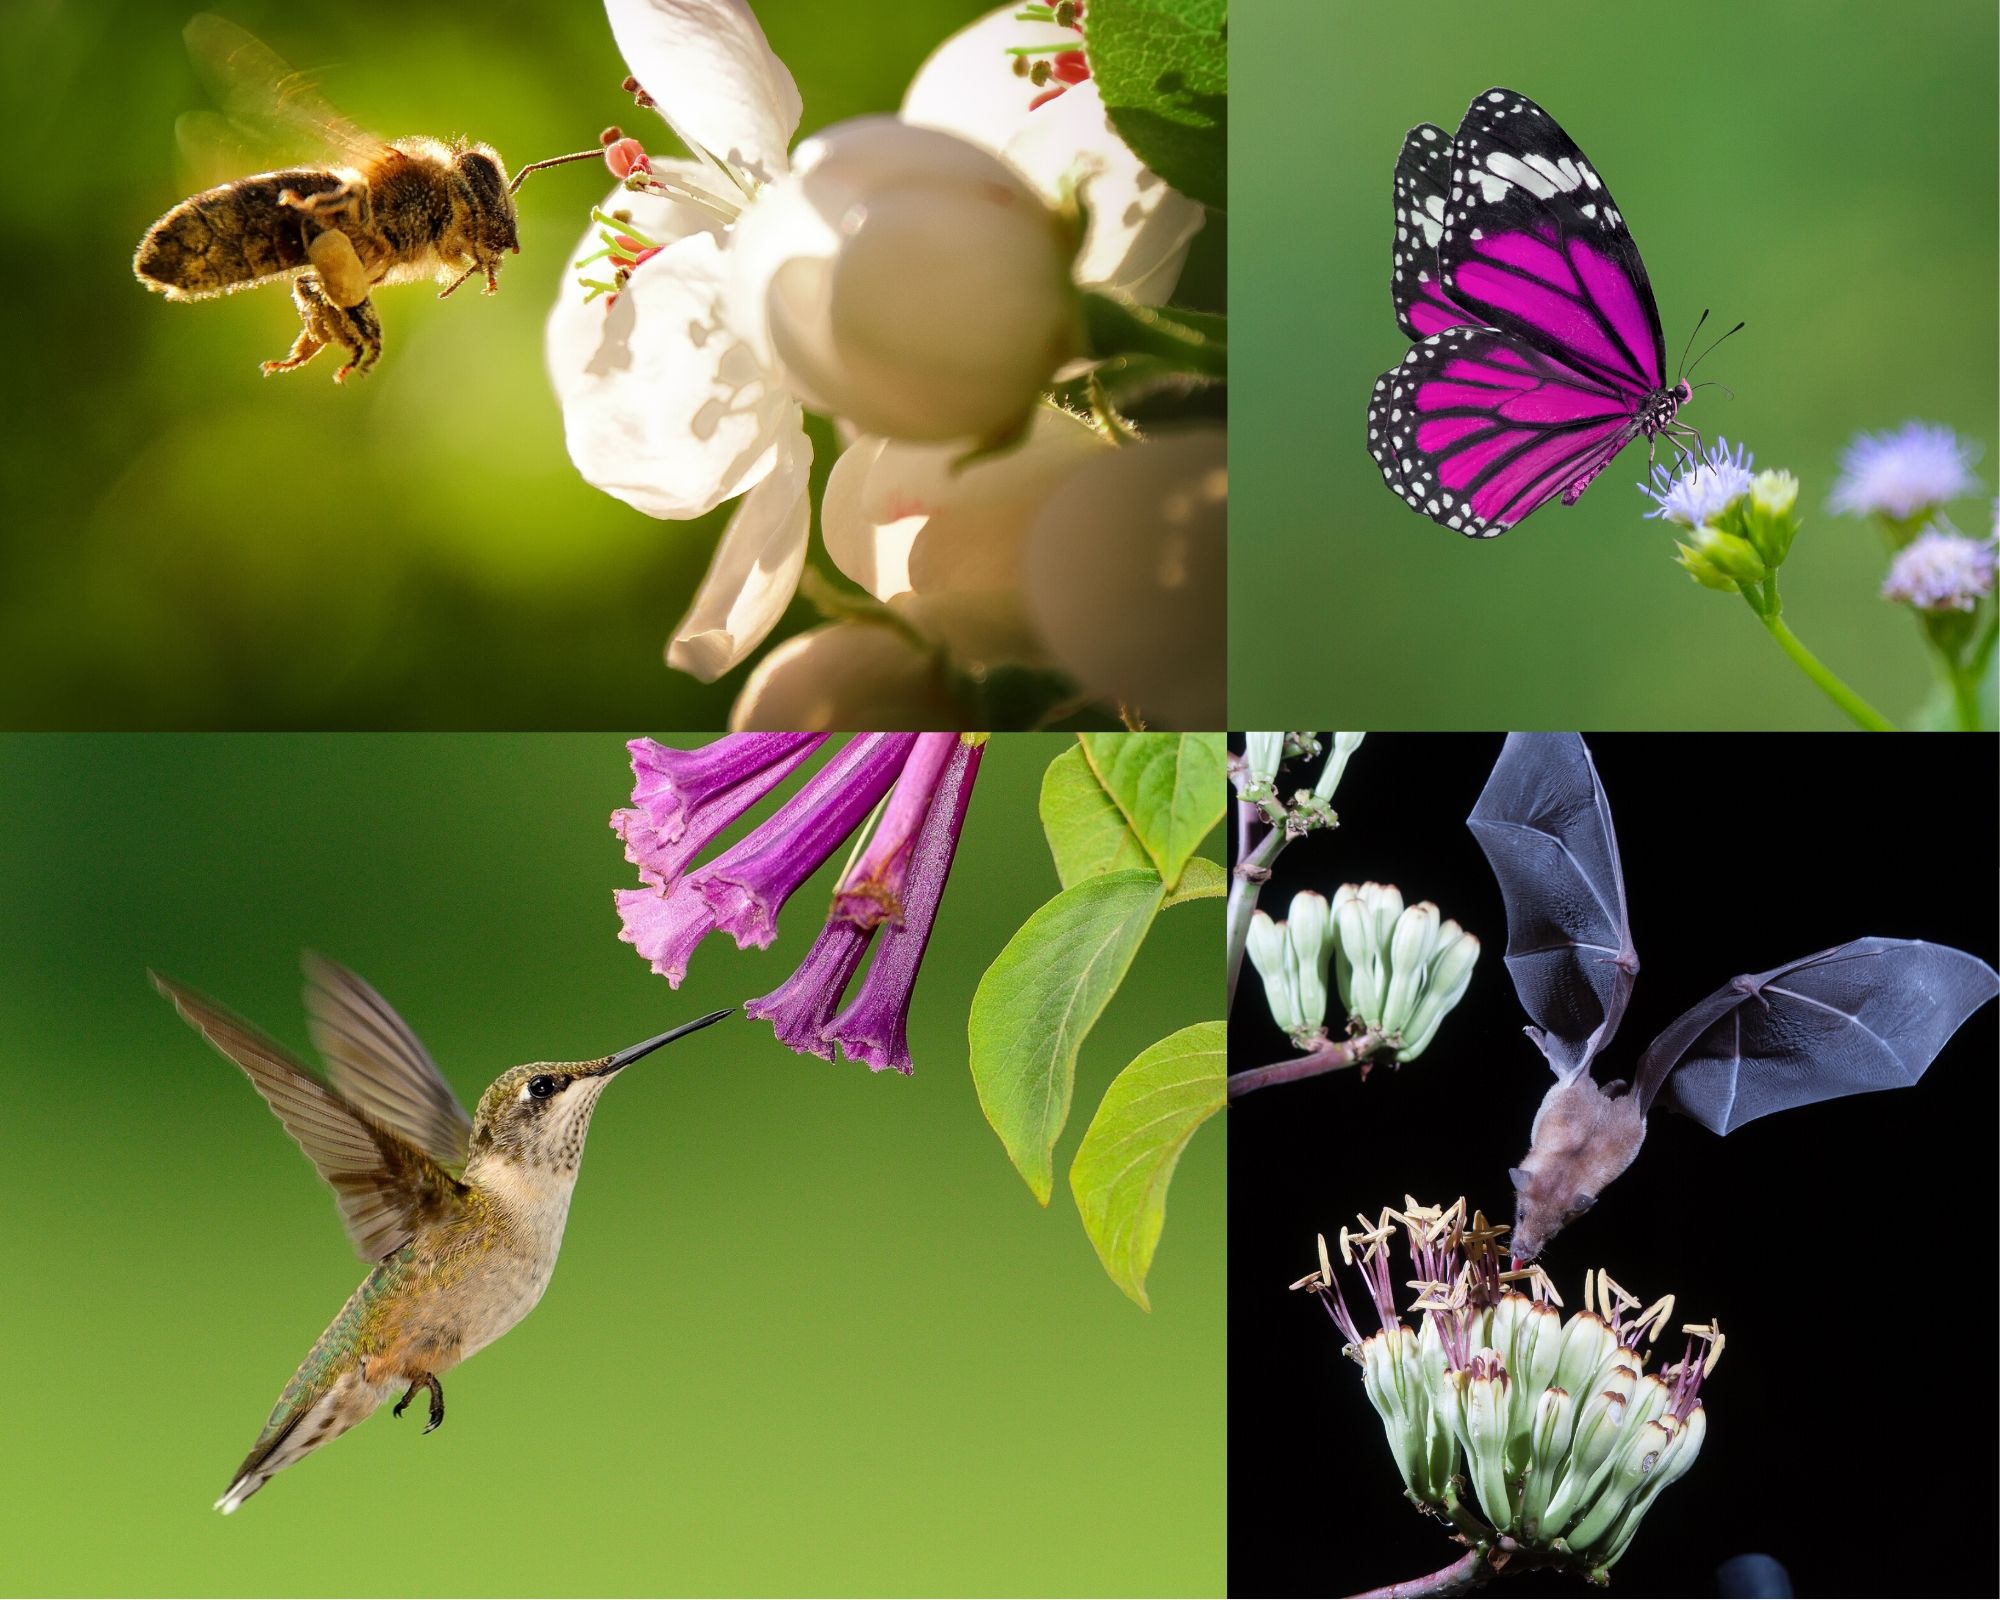 The co-evolution of pollinators and flowers showing a bee, a hummingbird, a butterfly and a bat approaching flowers that they feed from